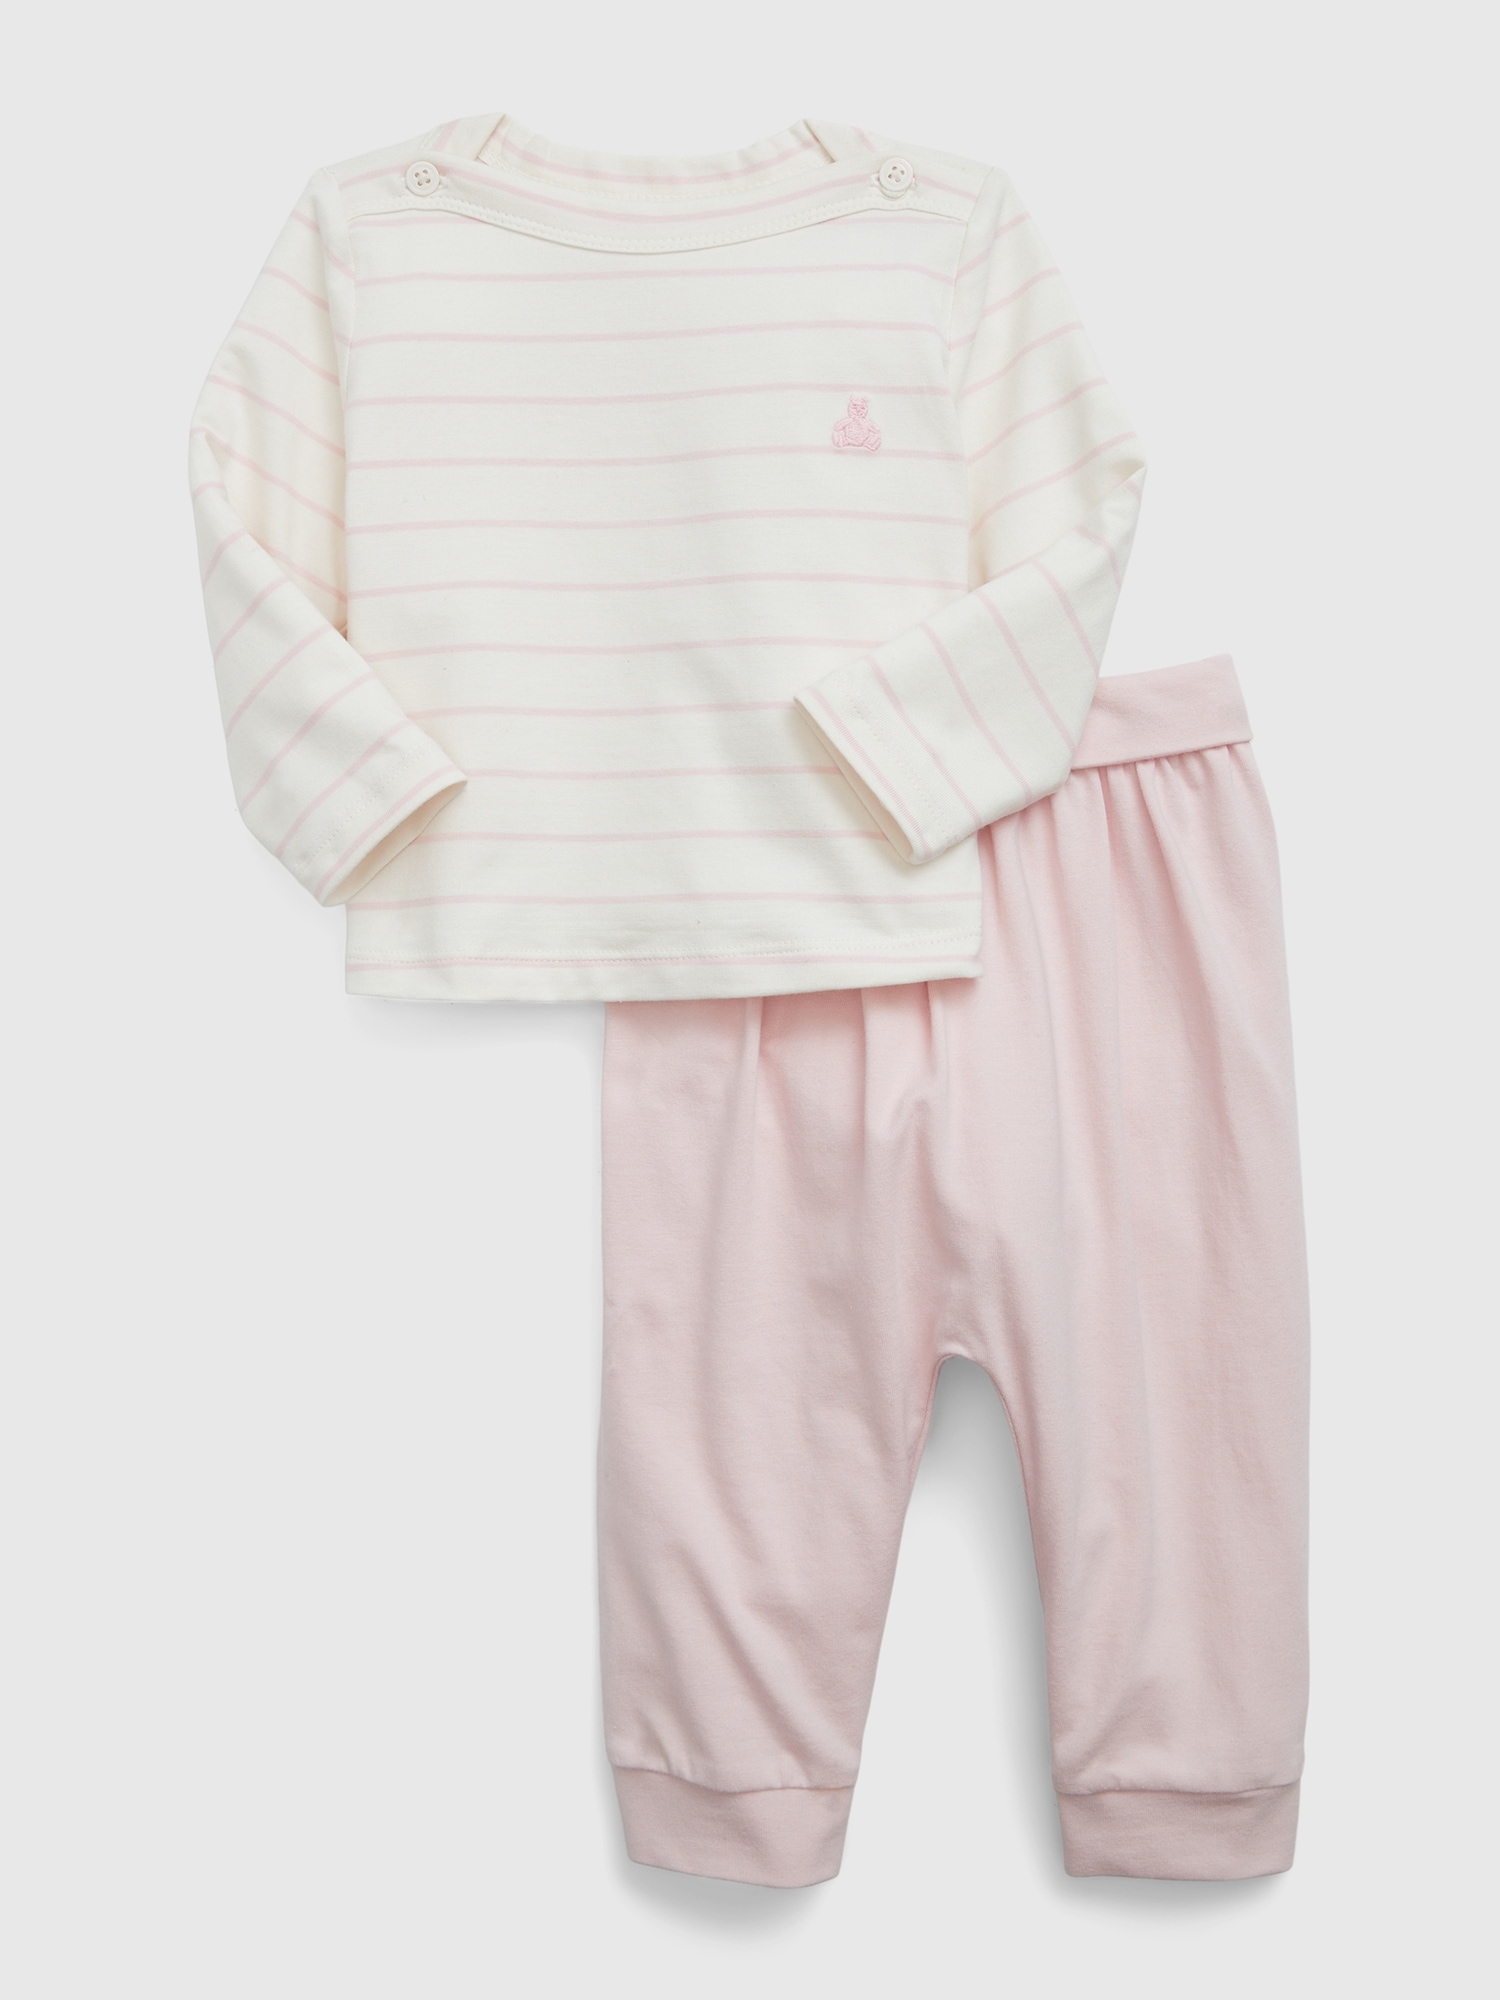 Gap Baby First Favorites Cotton Outfit Set